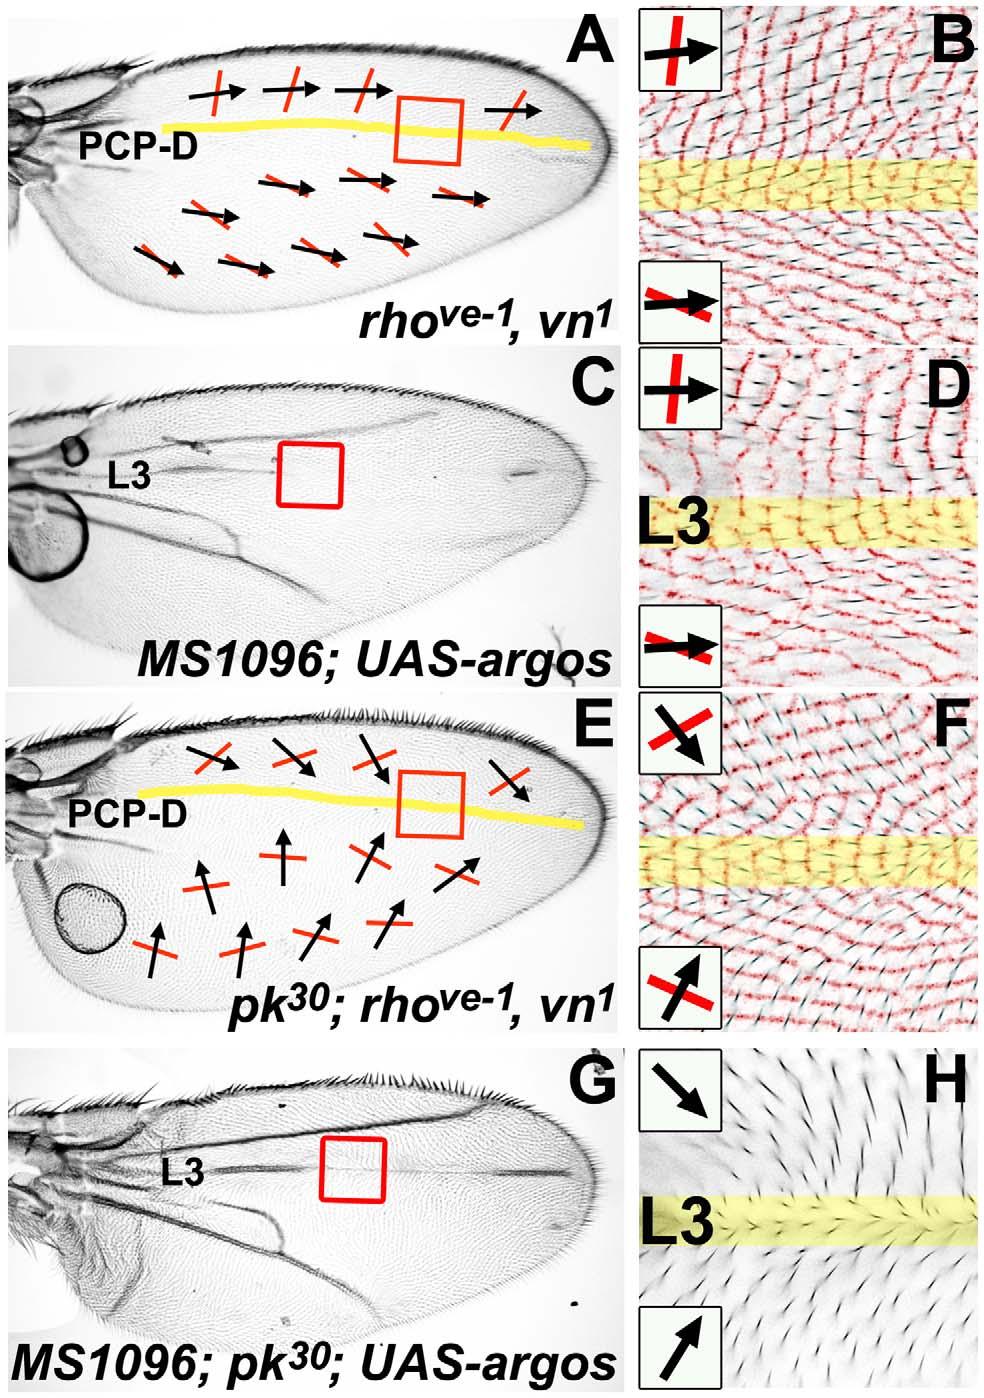 Figure 2. A PCP discontinuity (PCP-D) on the Drosophila wing. All micrographs are of the female dorsal wing surface.